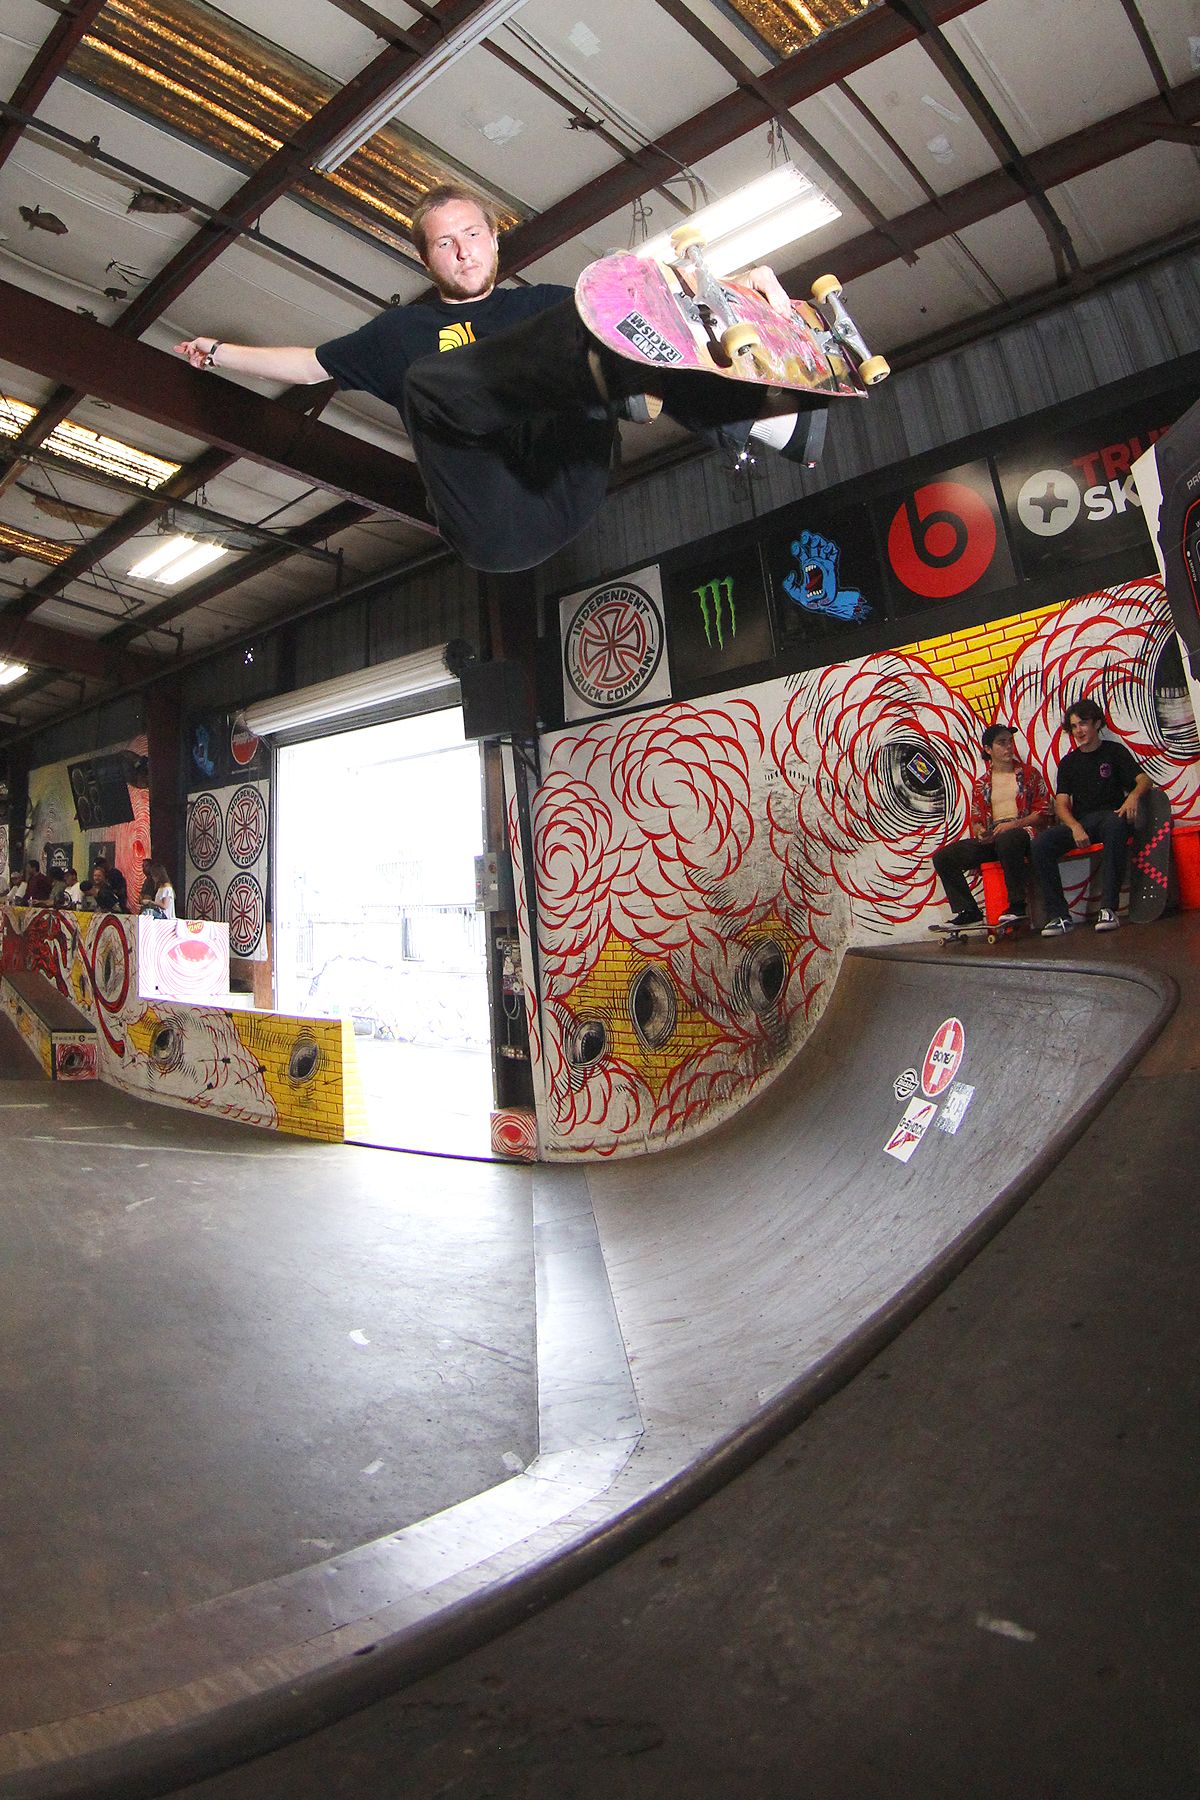 Photos From Best Foot Forward Contest at SPoT